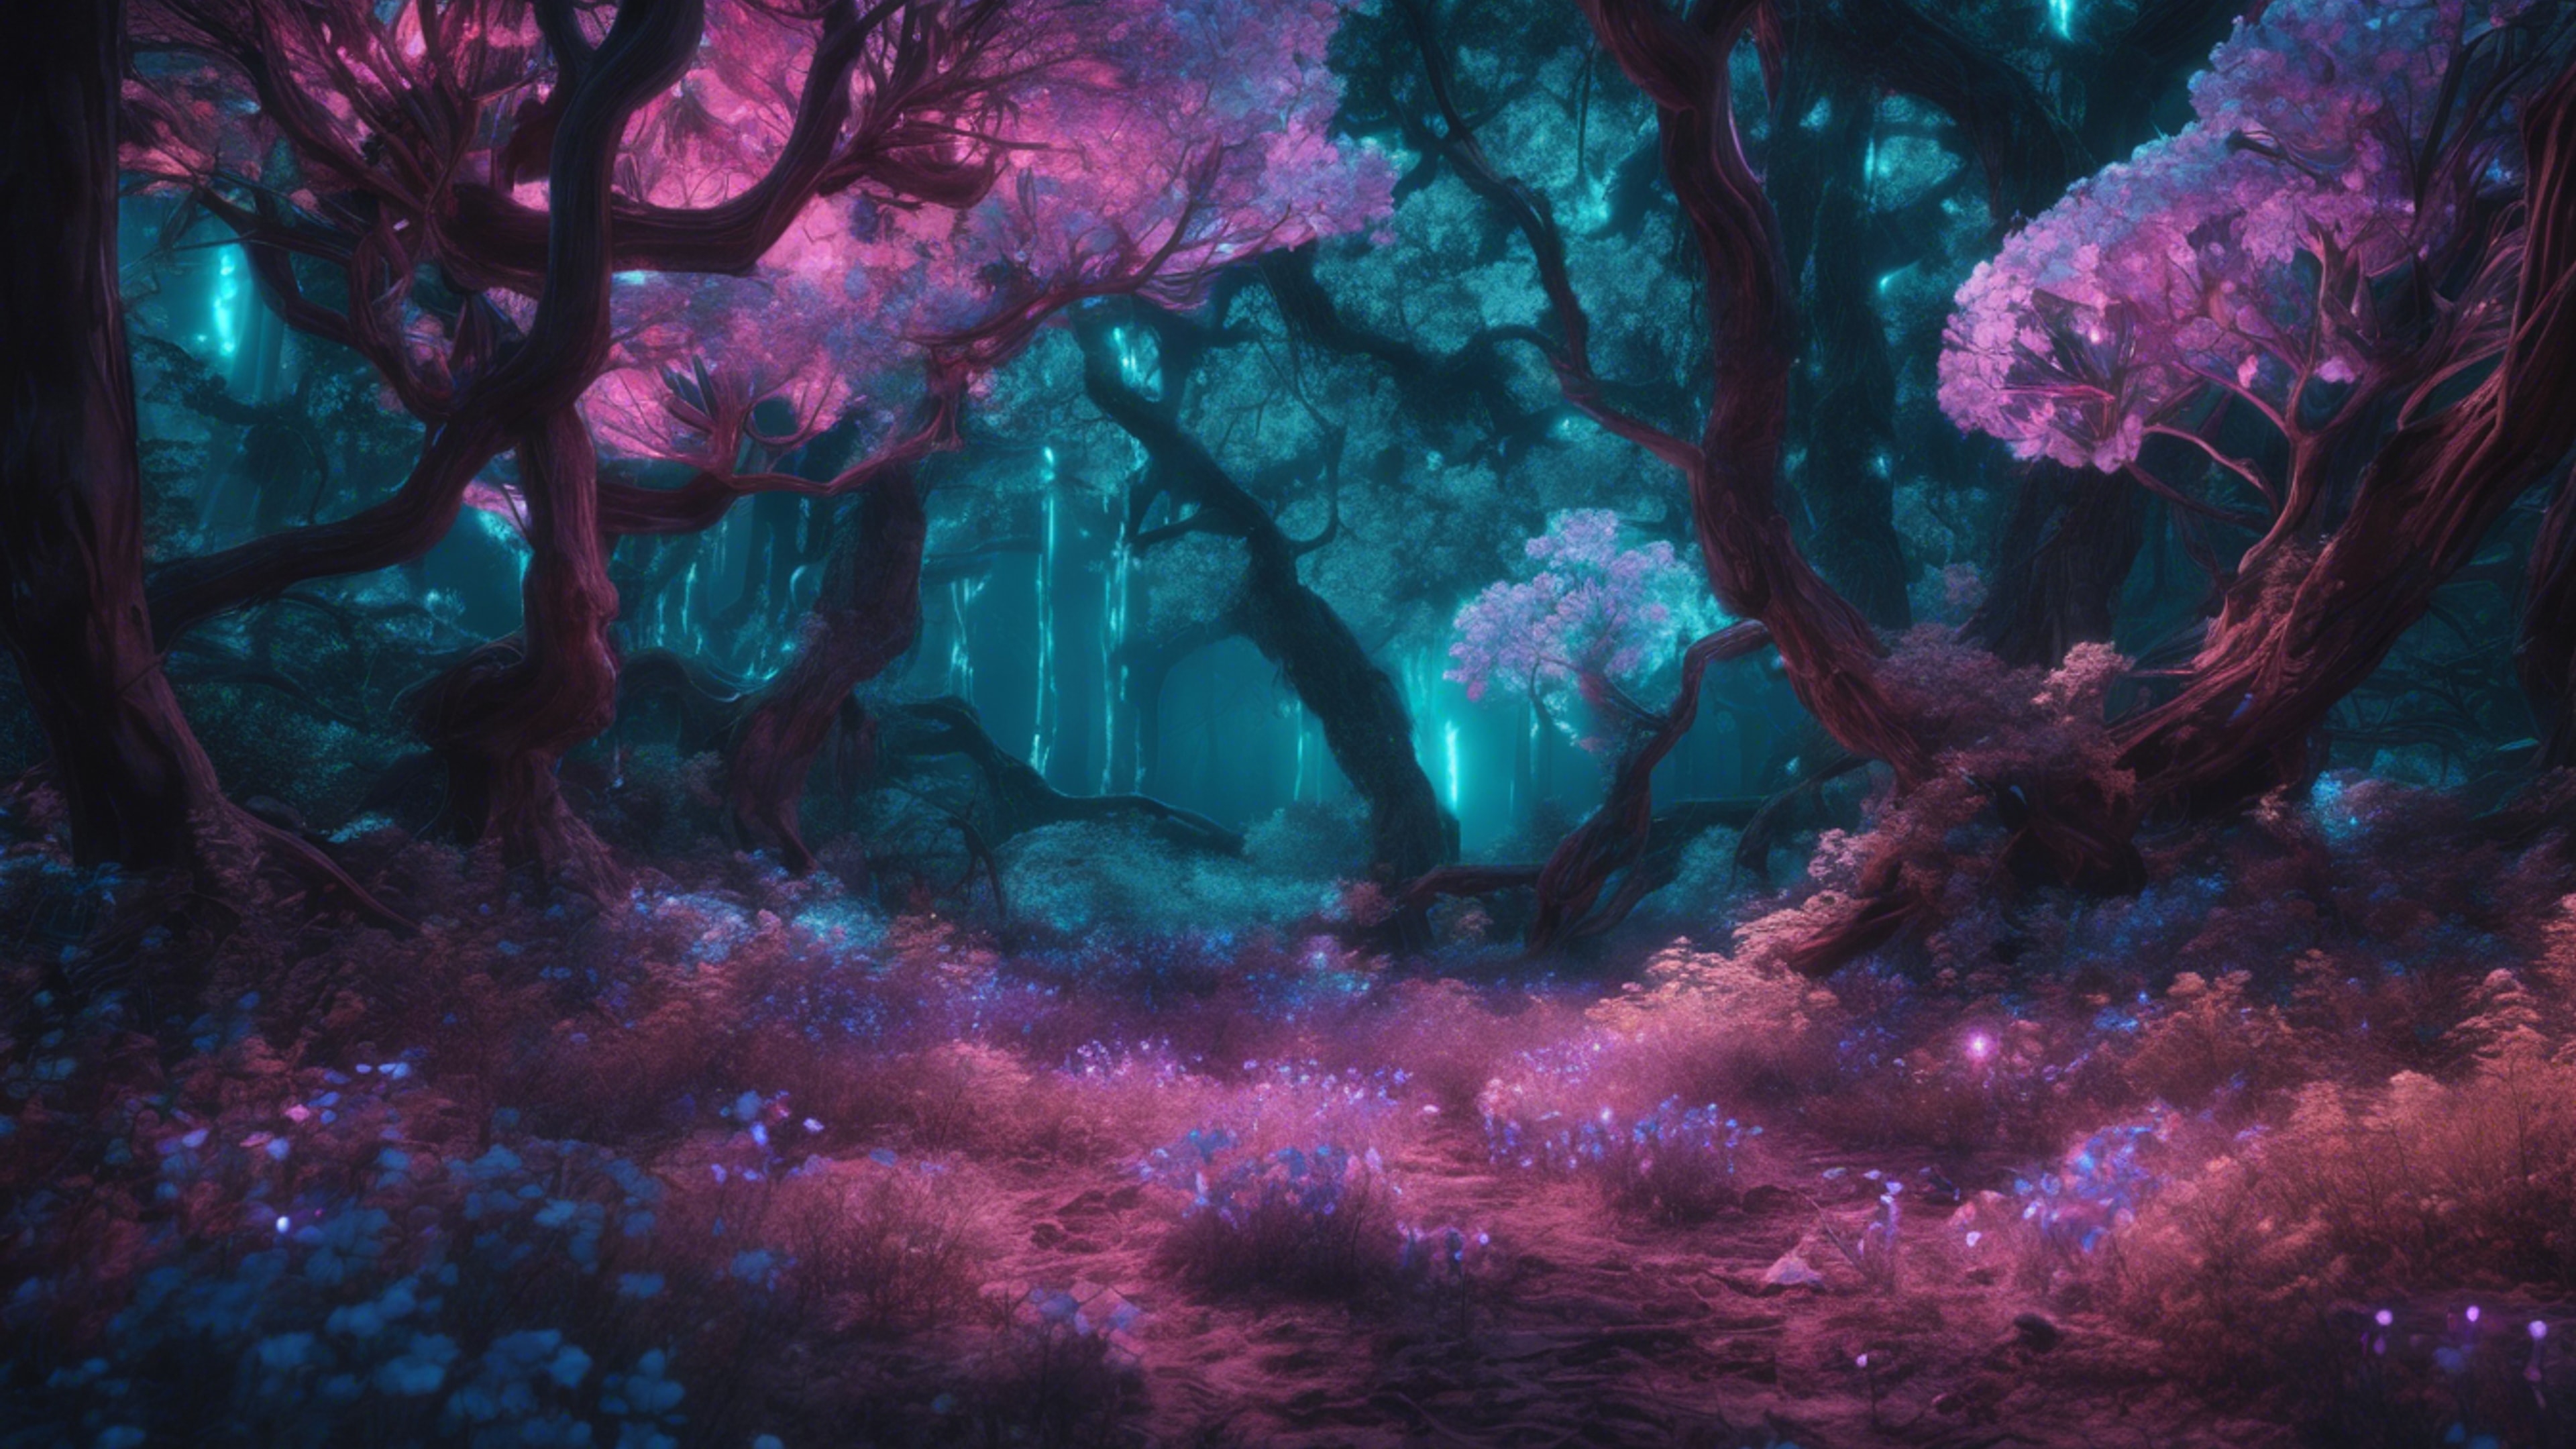 A Y2K style digital forest with illuminated bioluminescent trees and neon glowing flowers. Wallpaper[de86584624734c4ebdfb]